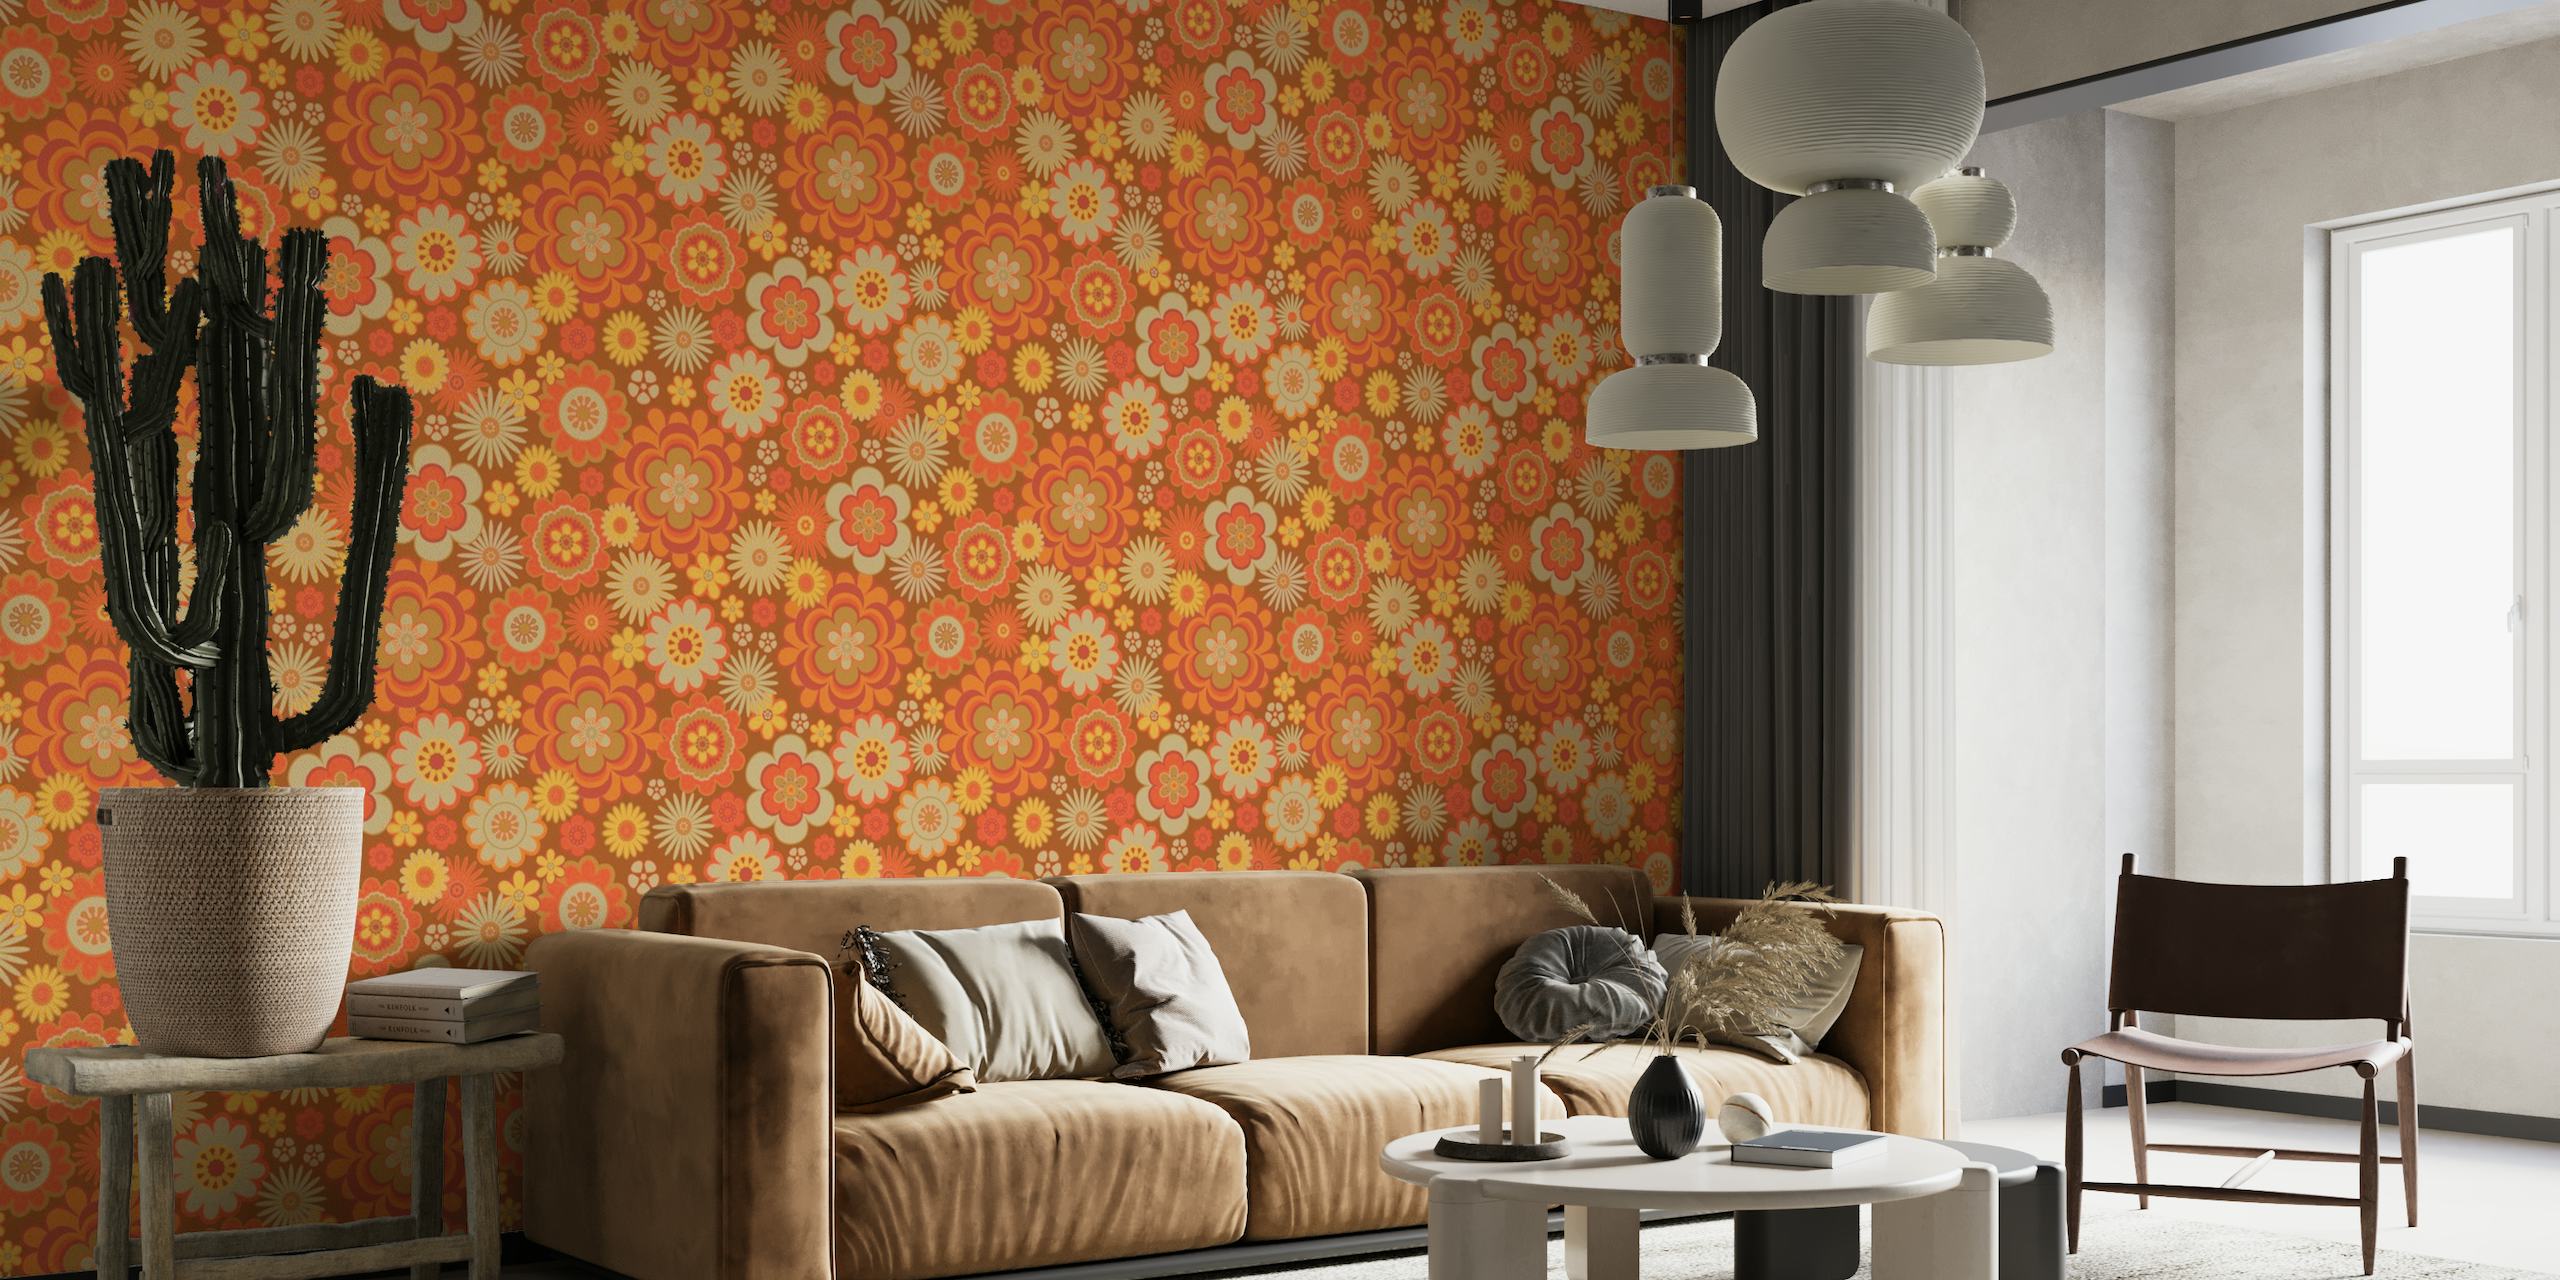 Retro 70s Groovy Floral wallpaper